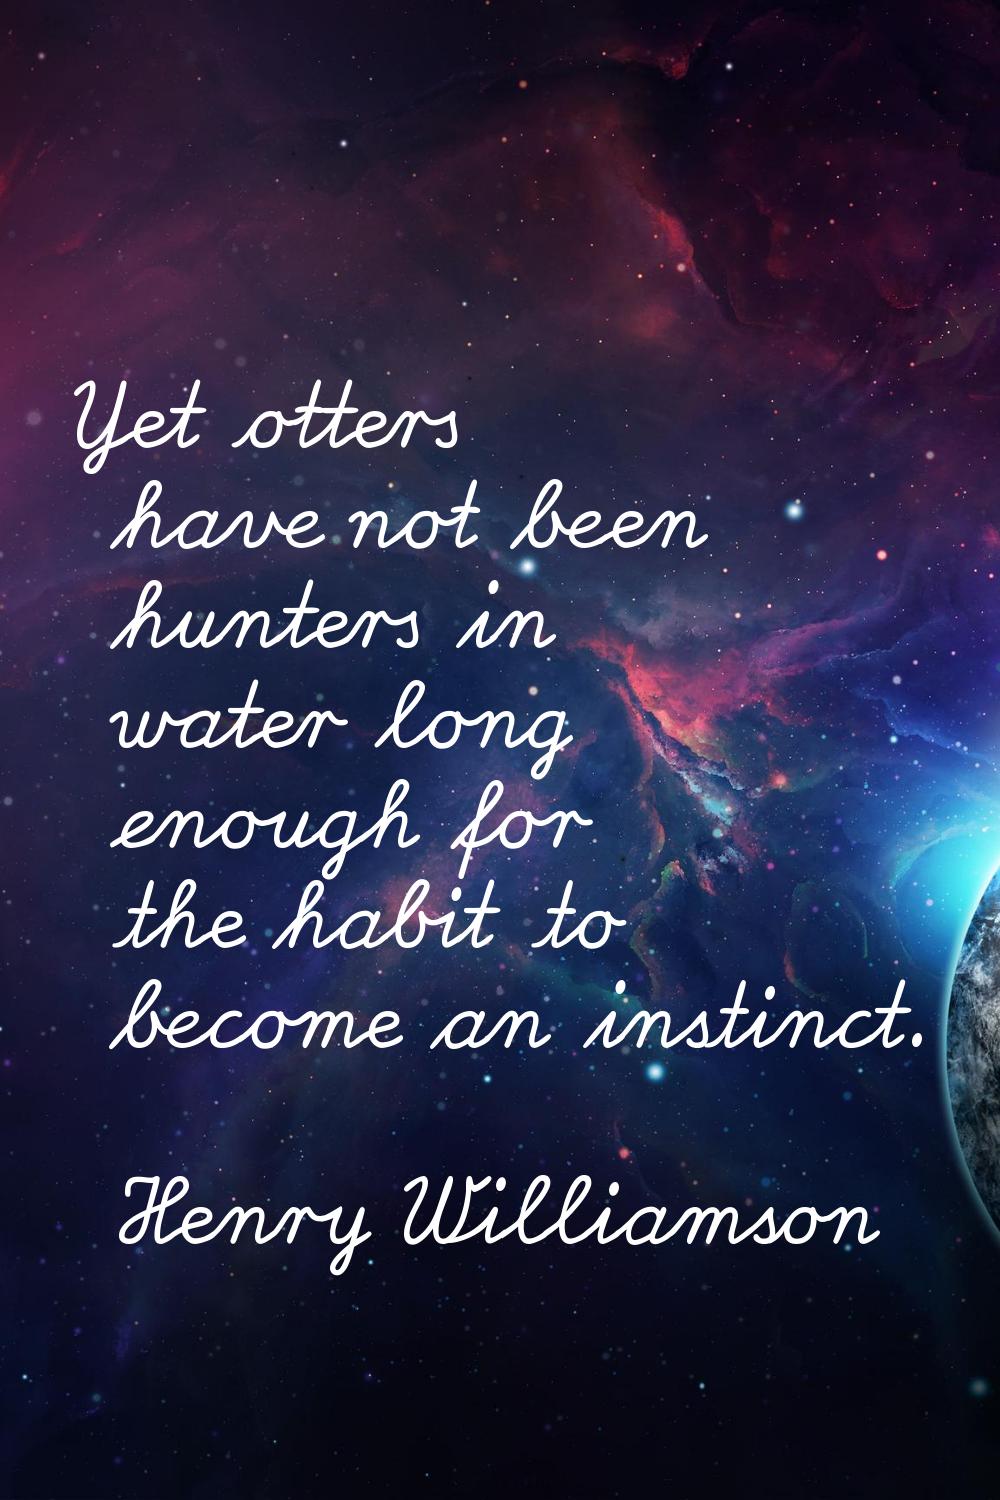 Yet otters have not been hunters in water long enough for the habit to become an instinct.